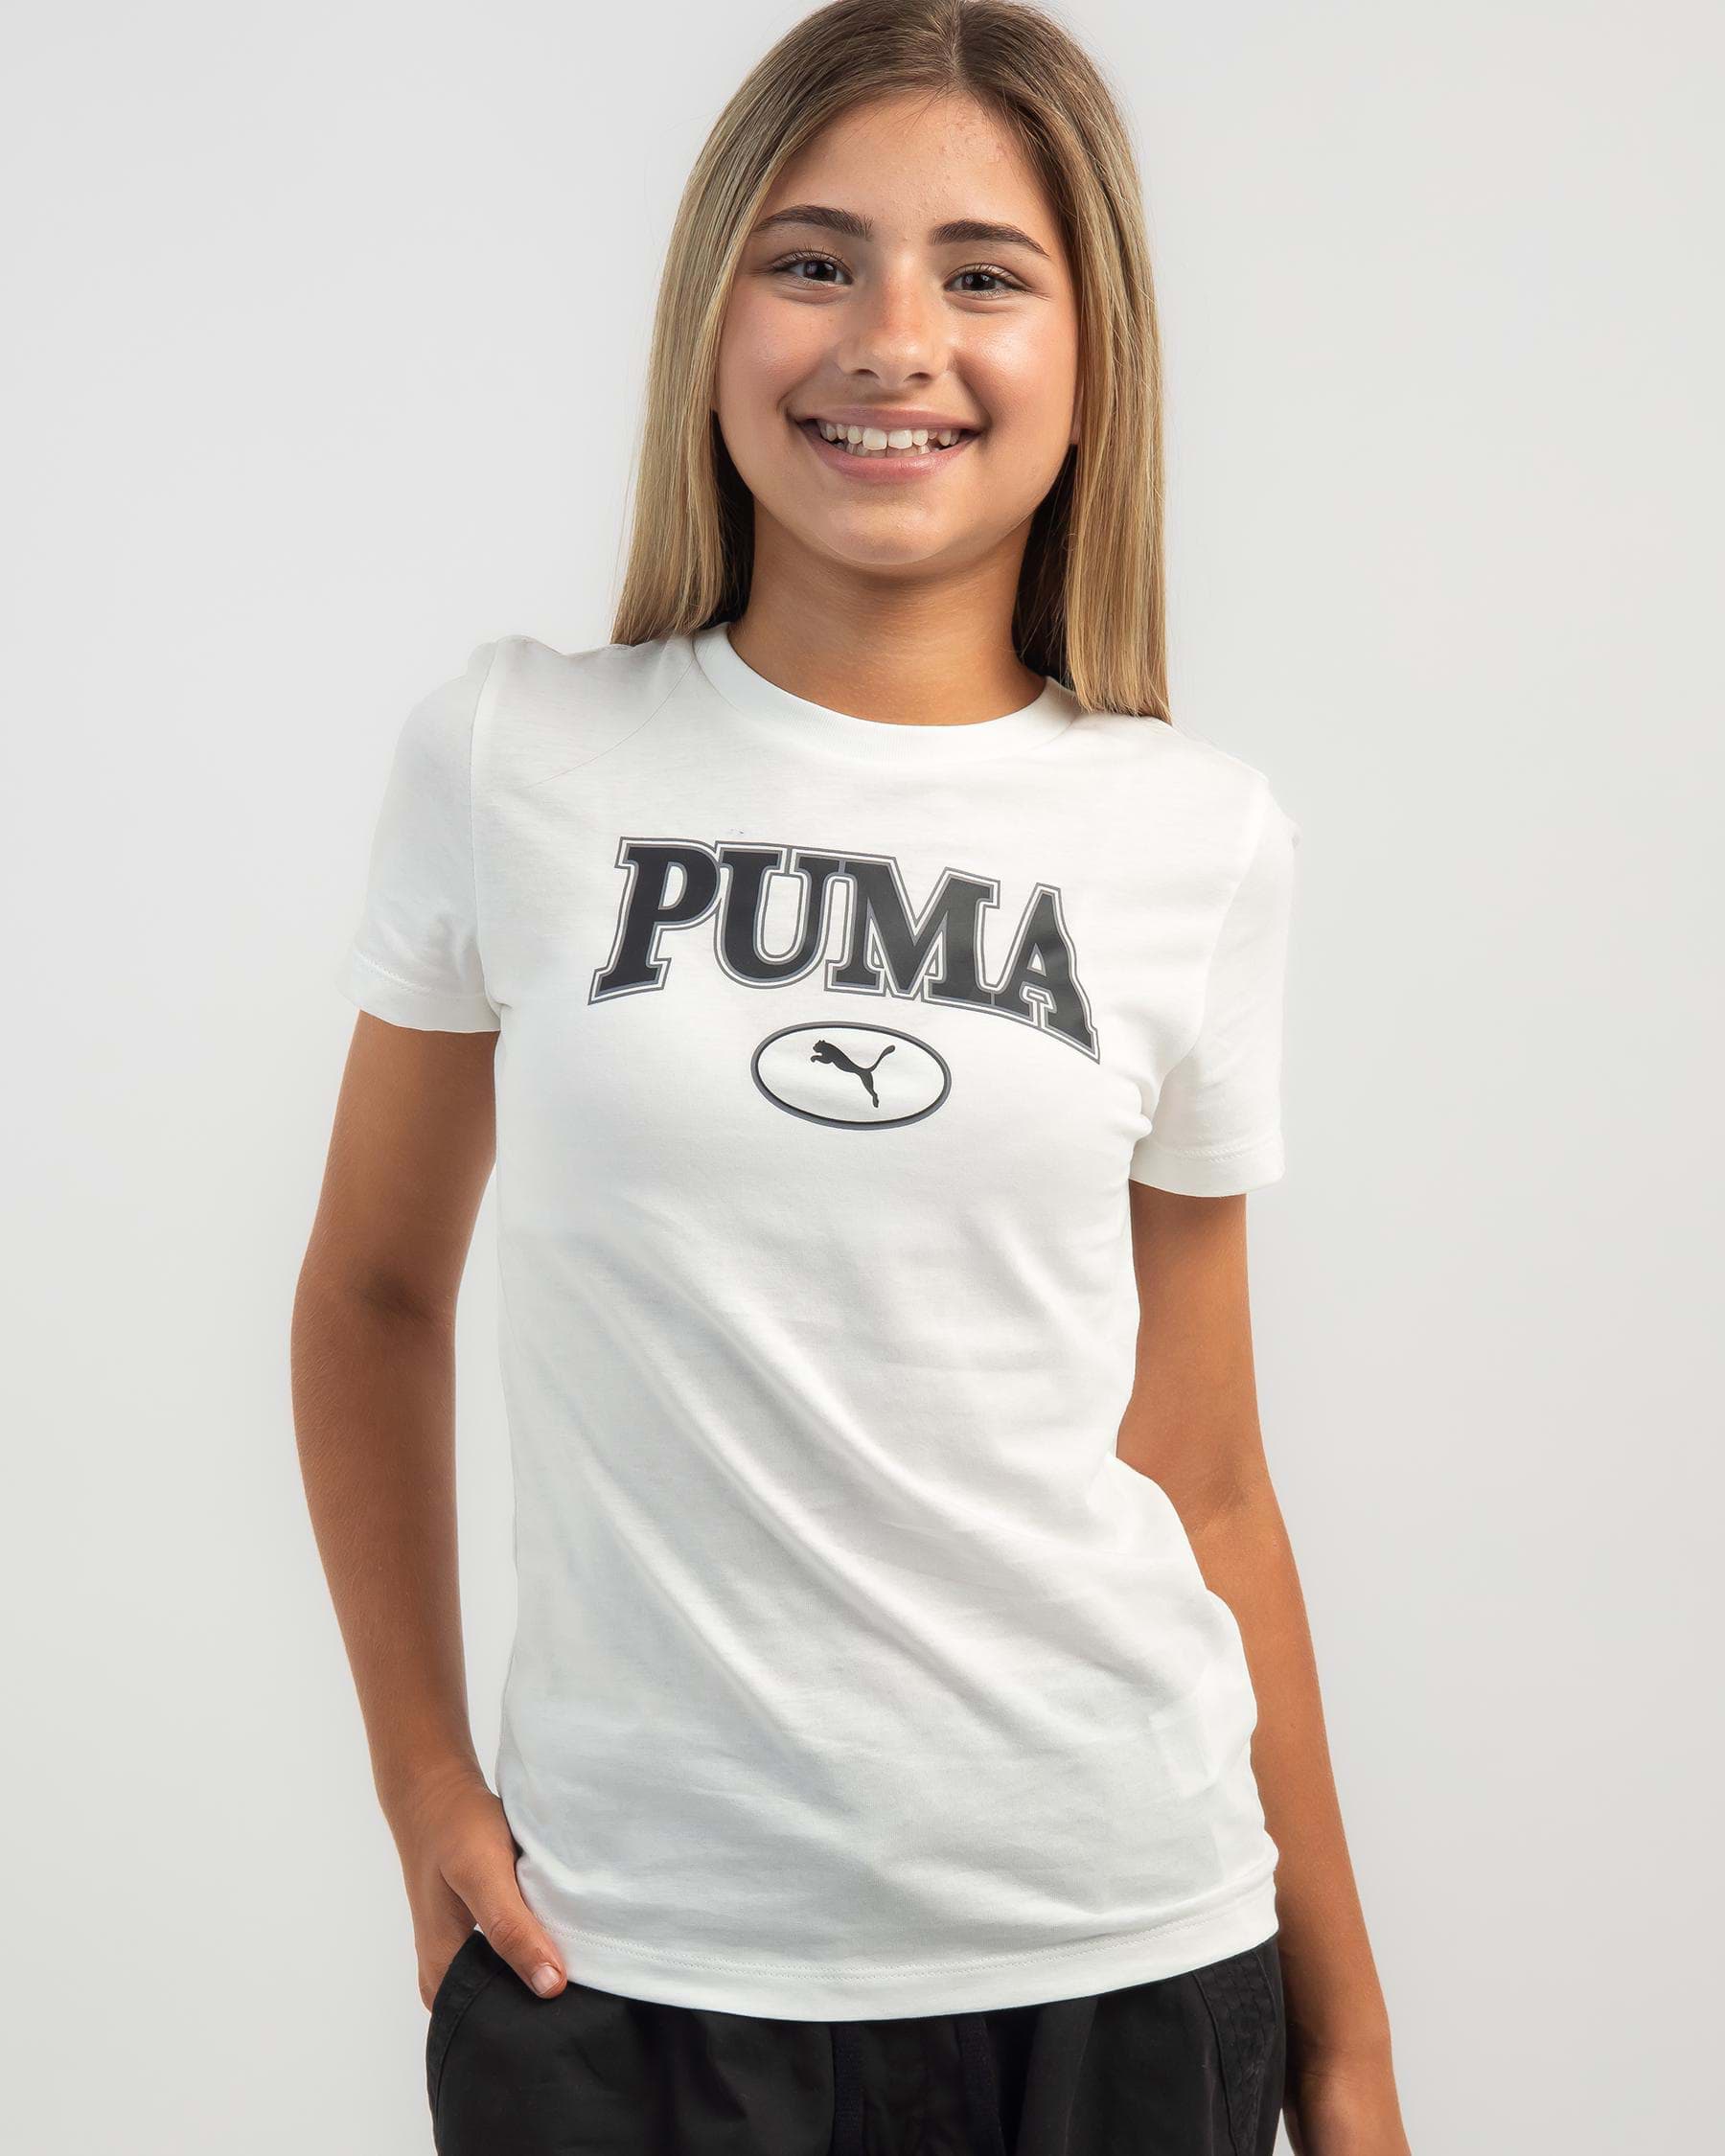 & United In T-Shirt States Puma Warm Easy Beach White Graphic - Shipping Returns Squad FREE* - Girls\' City